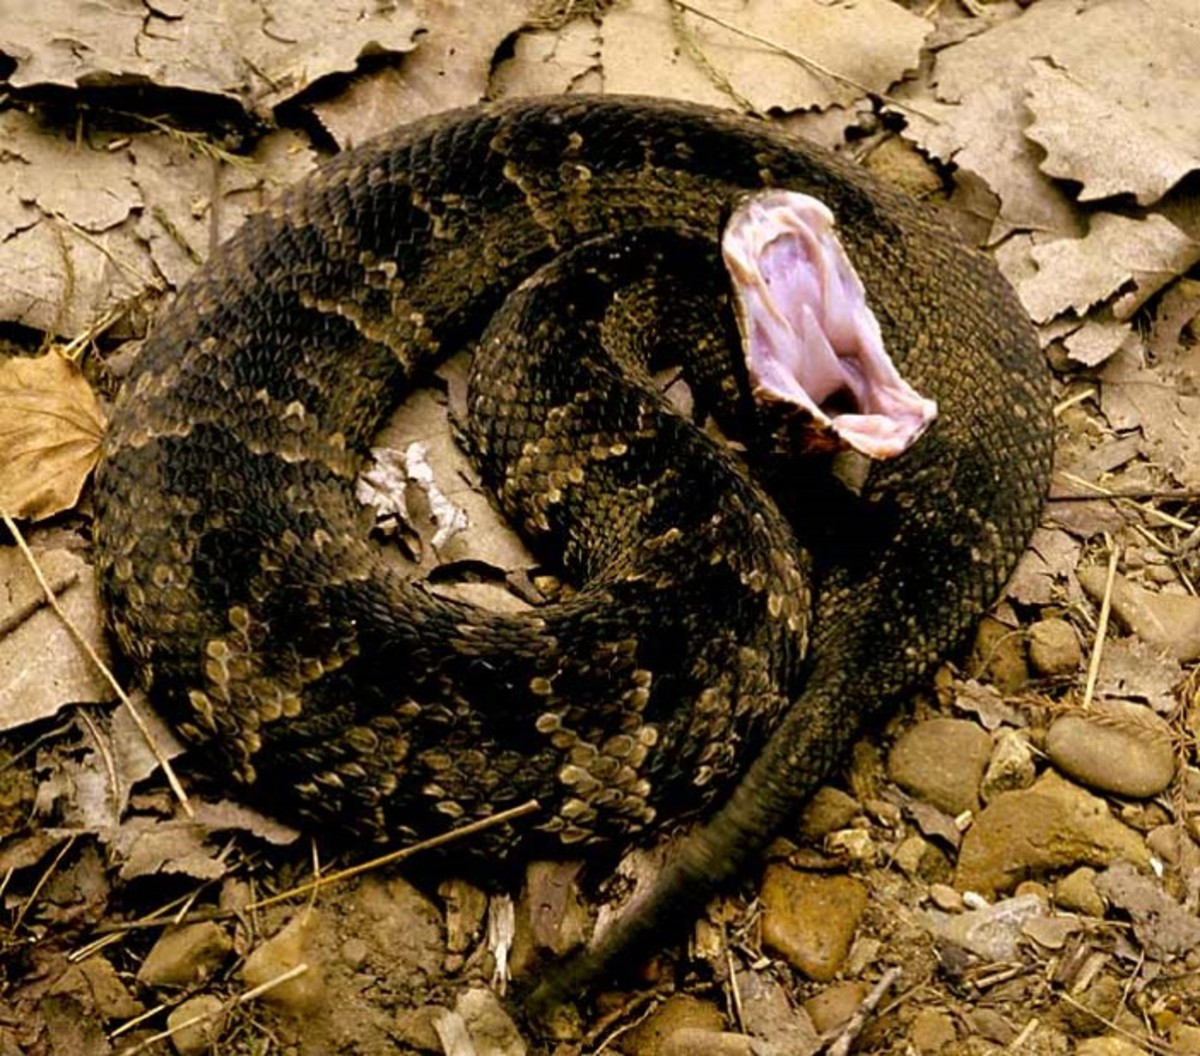 A venomous snake native to the southern range of North America, frequenting stream beds and riverbanks.